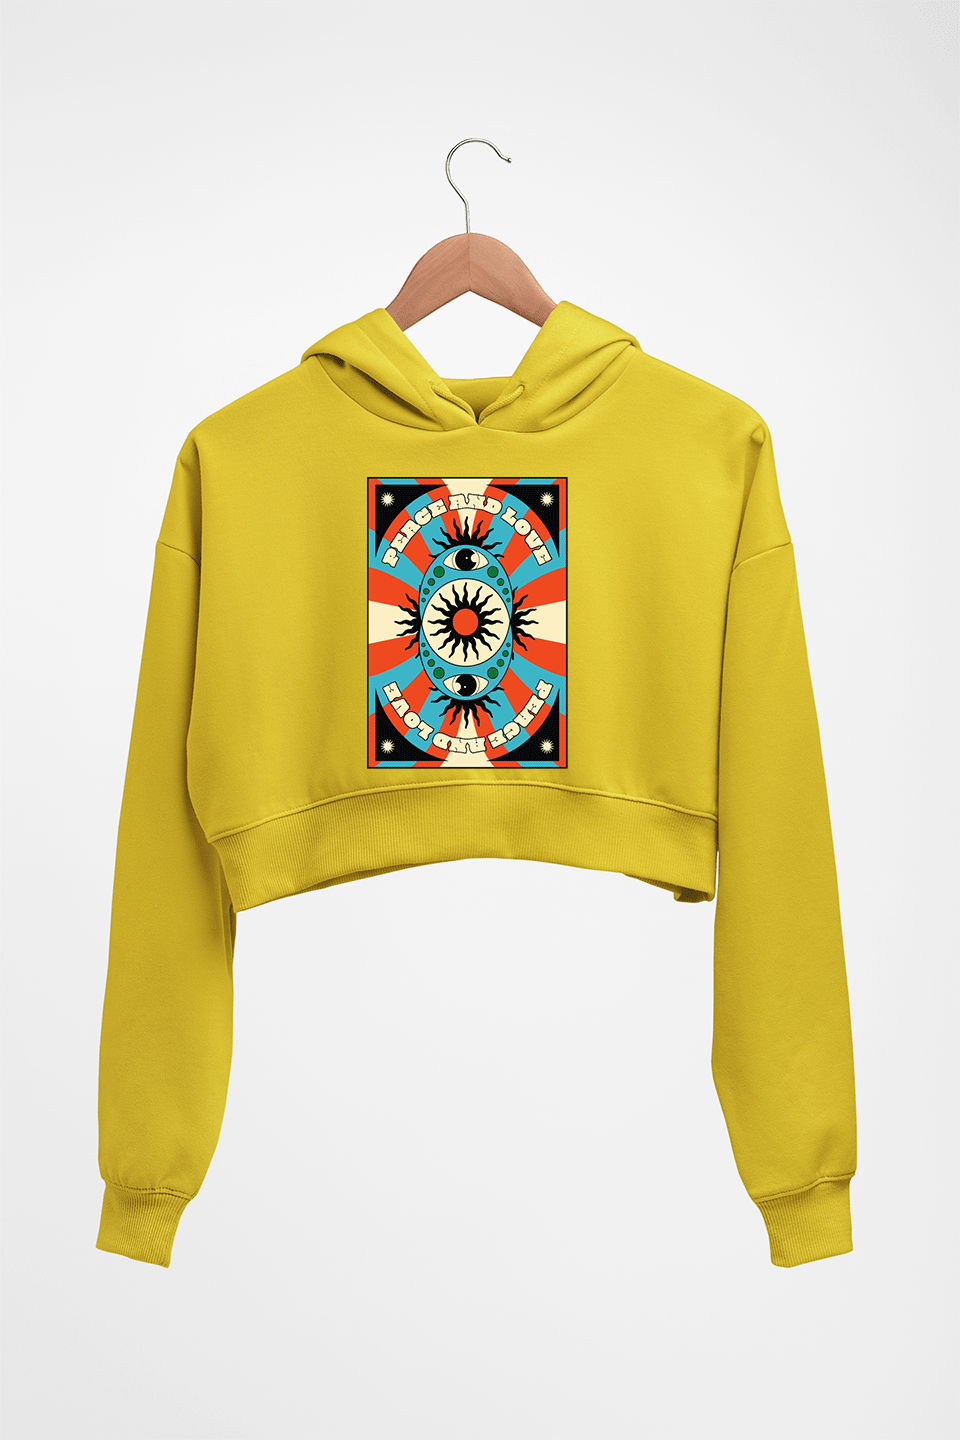 Psychedelic Peace and Love Crop HOODIE FOR WOMEN